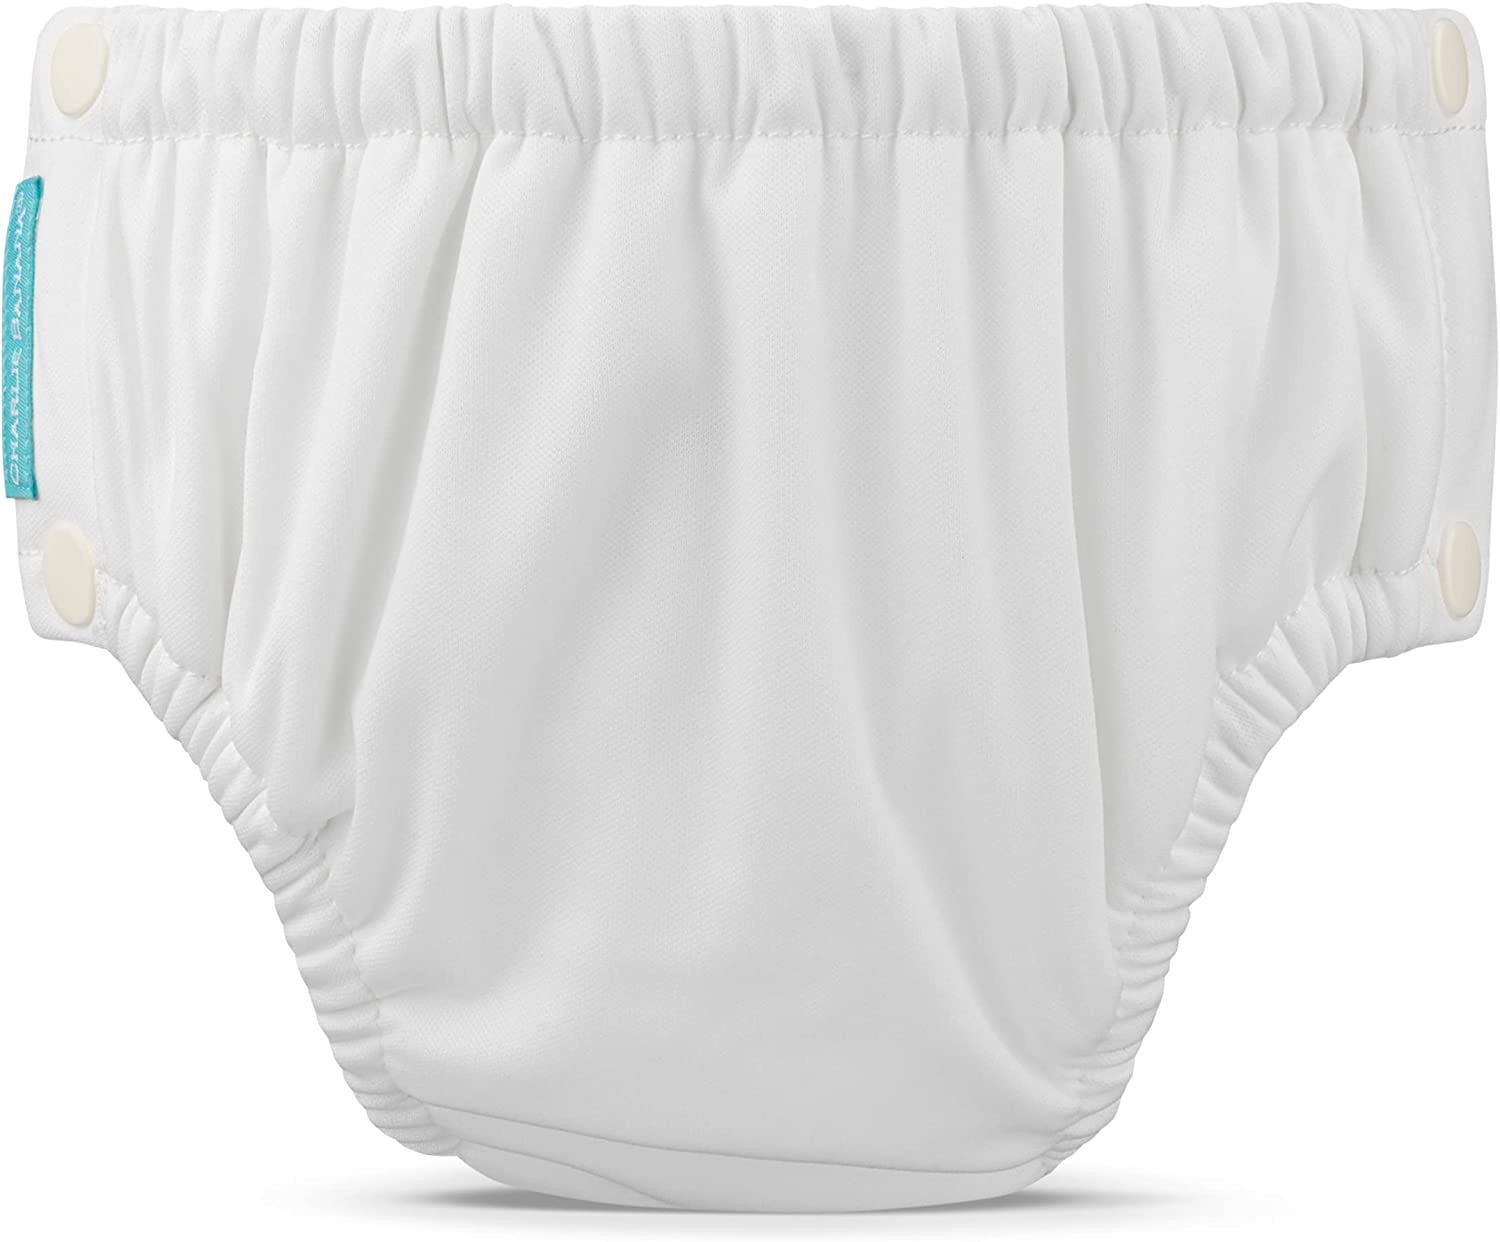 Charlie Banana Reusable Swim Diaper with Snaps, Easy-On and Off, Snug Fit to Prevent Leaks, White, Medium (14-20lbs)